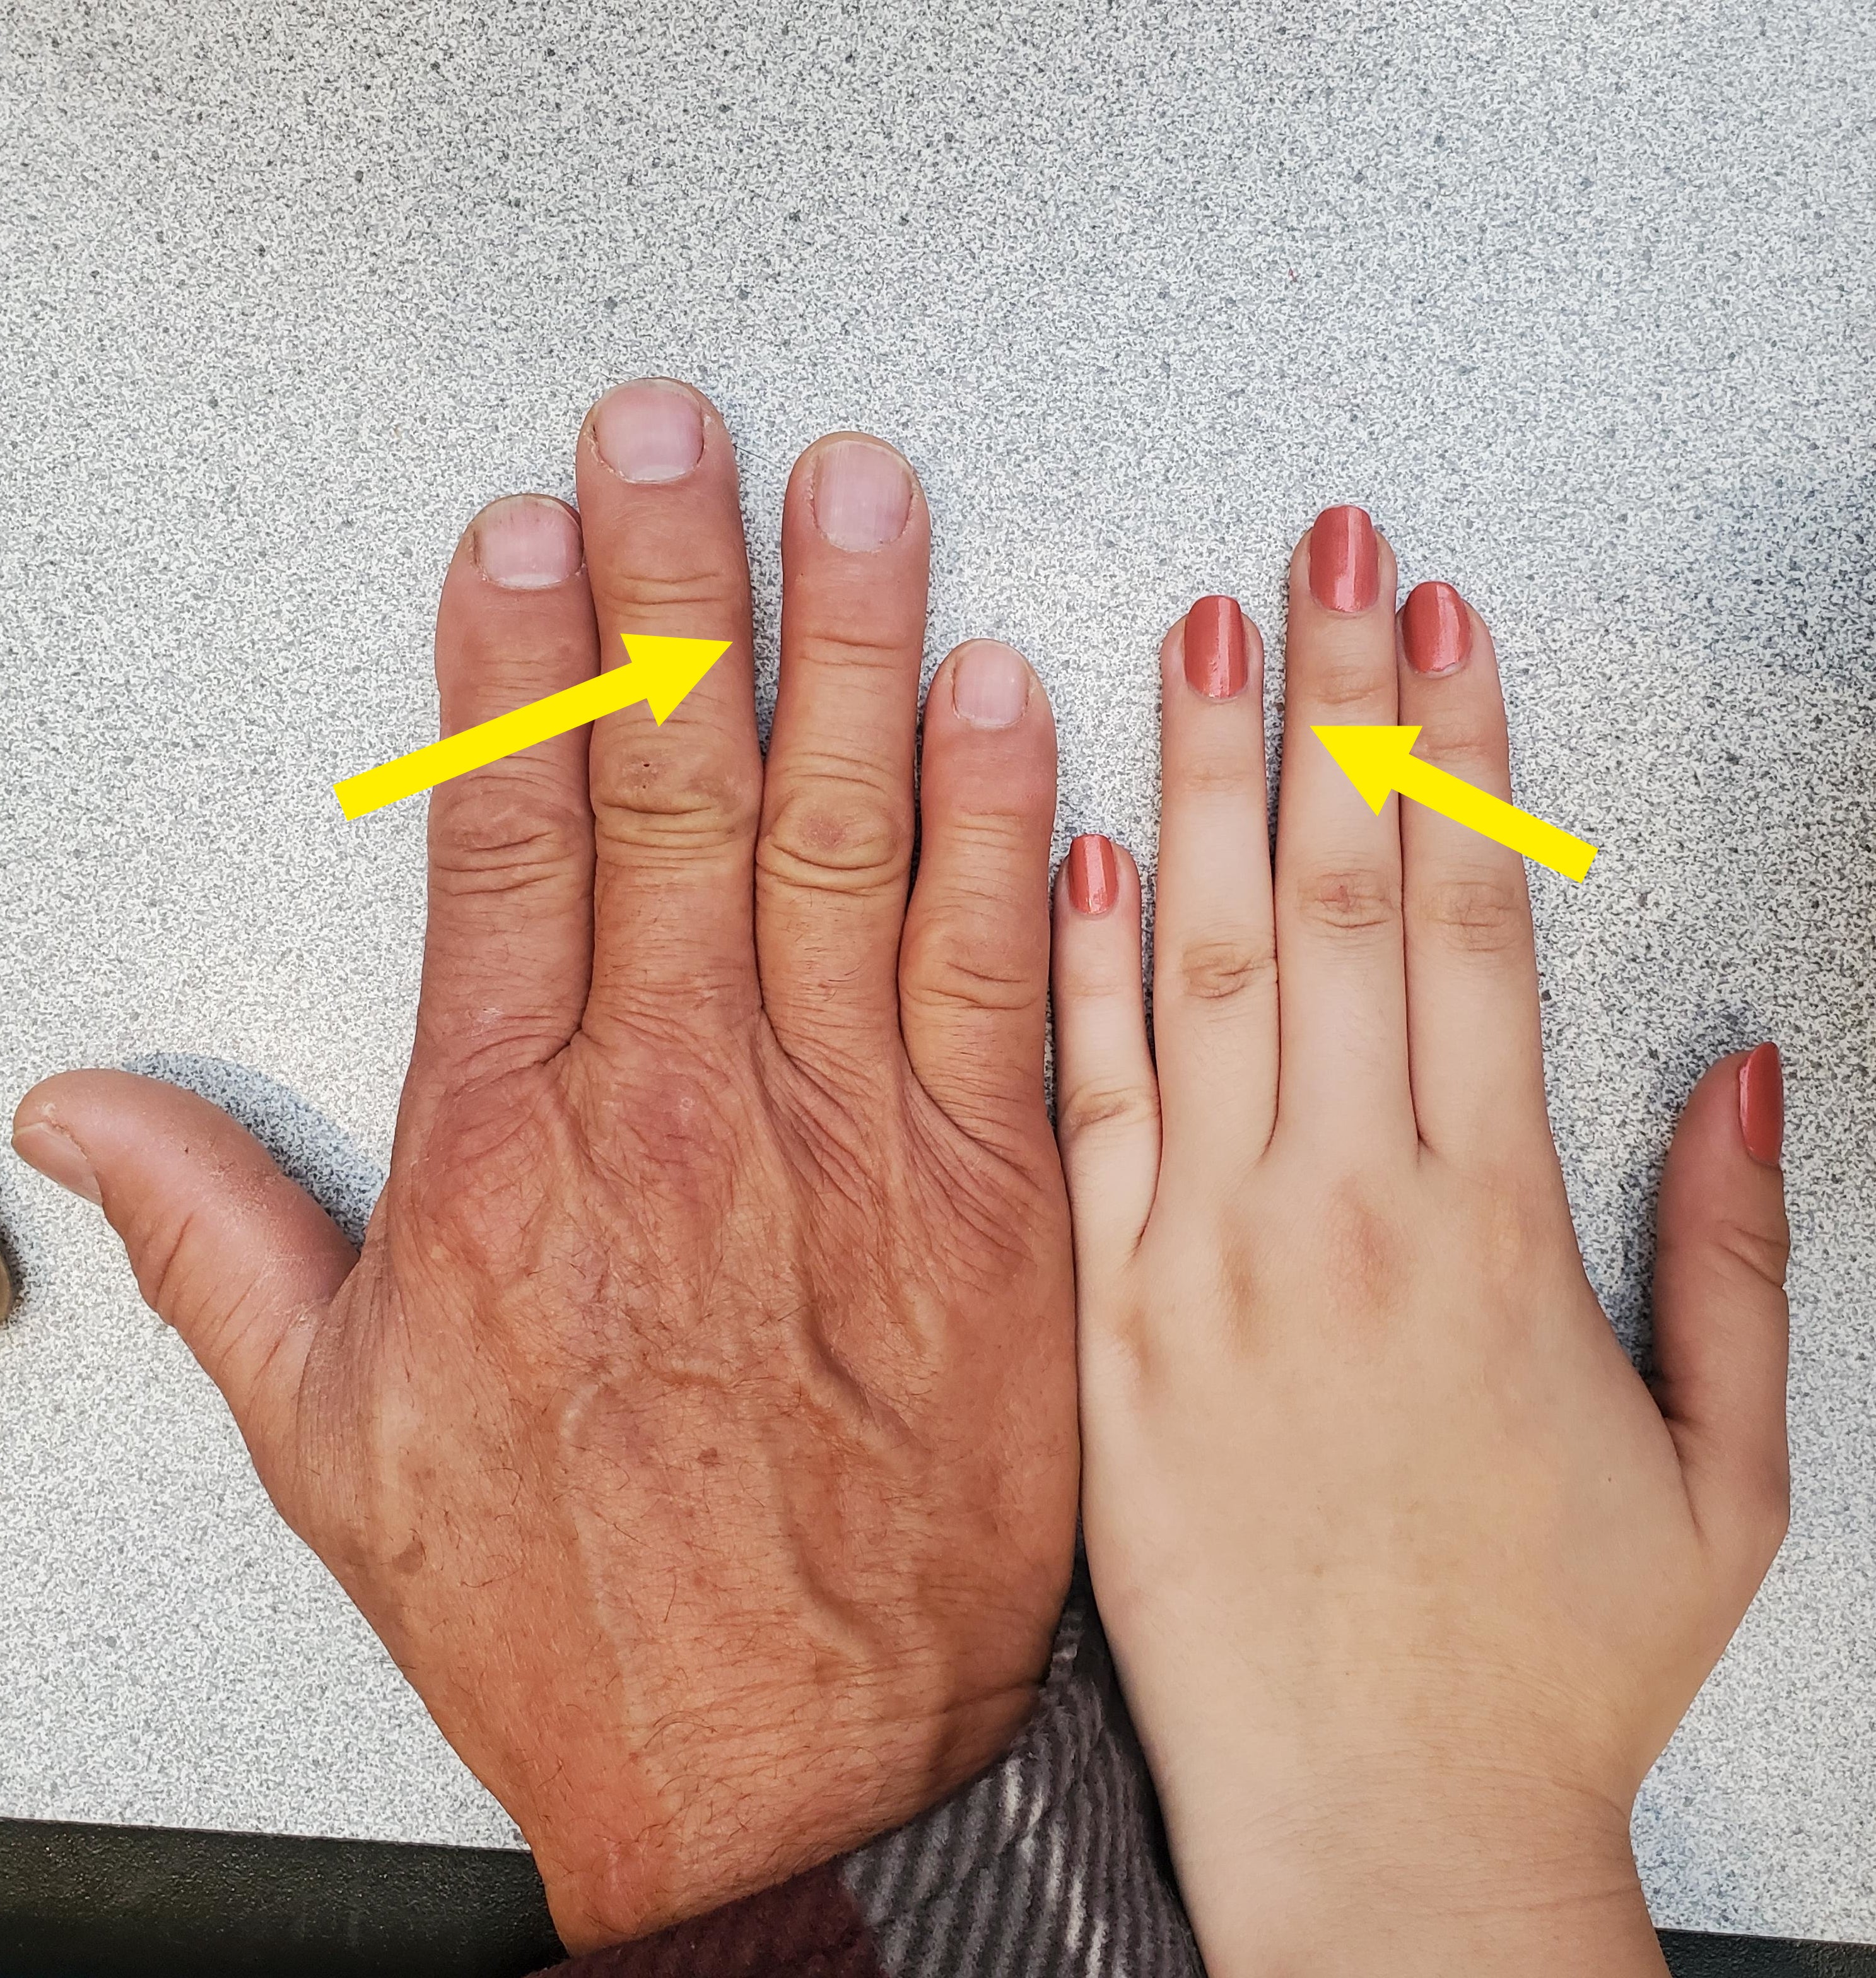 Hands with small gaps in them